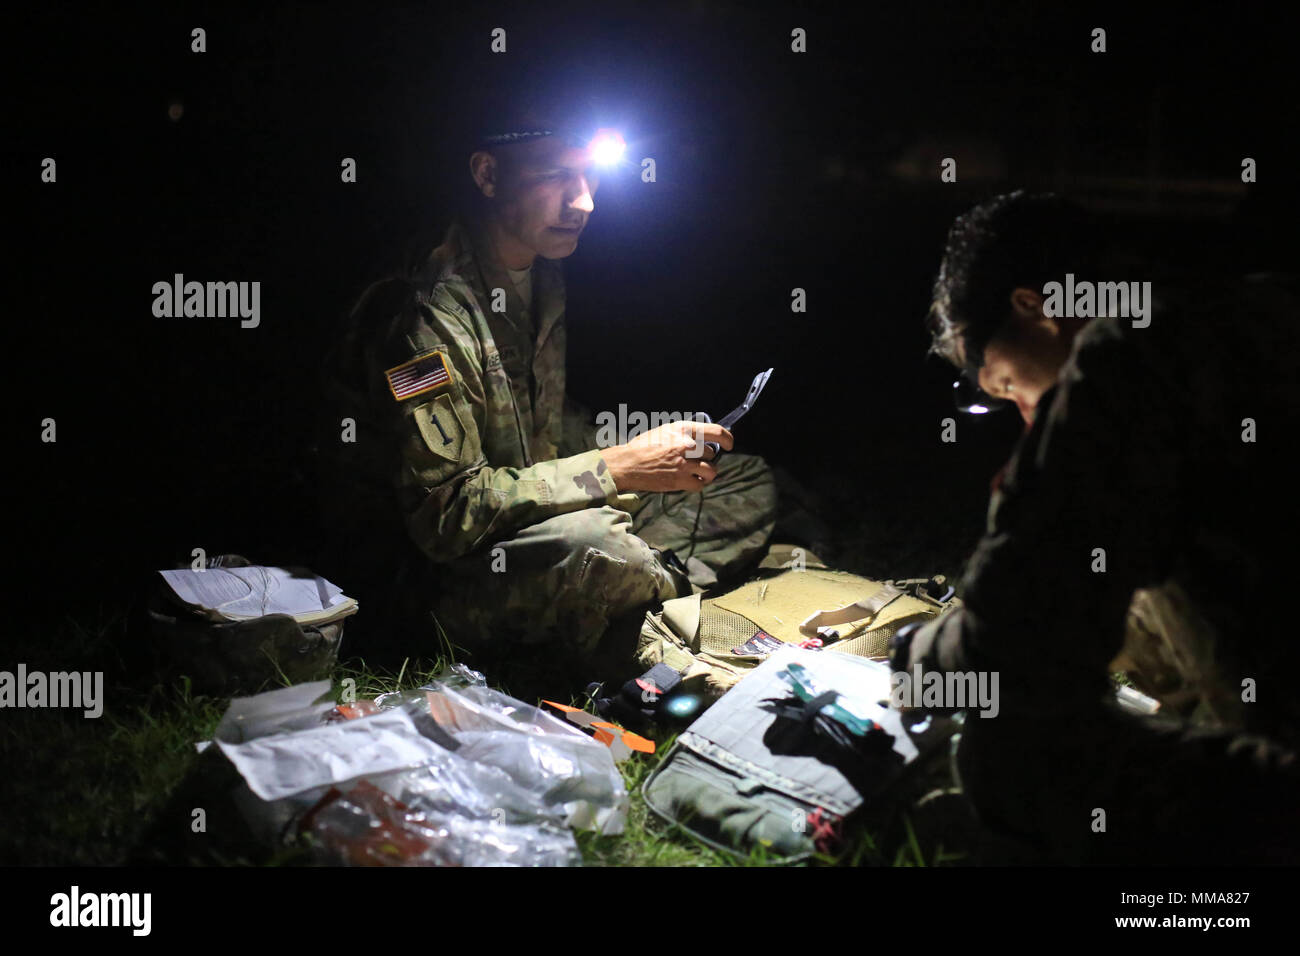 U.S. Army Staff Sgt. Eric Jonier and Staff Sgt. Mkakauet Generauax, both assigned to the Lyster Army Community Hospital, pack their medical bags before the simulated Mass Casualty Event during the 2017 Best Medic Competition at Fort Bragg, N.C., Sep. 18-21, 2017. The competition tested the physical and mental toughness, as well as the technical competence, of each medic to identify the team moving forward to represent the region at the next level of the competition.  (U.S. Army photo by Spc. Paris Maxey) Stock Photo